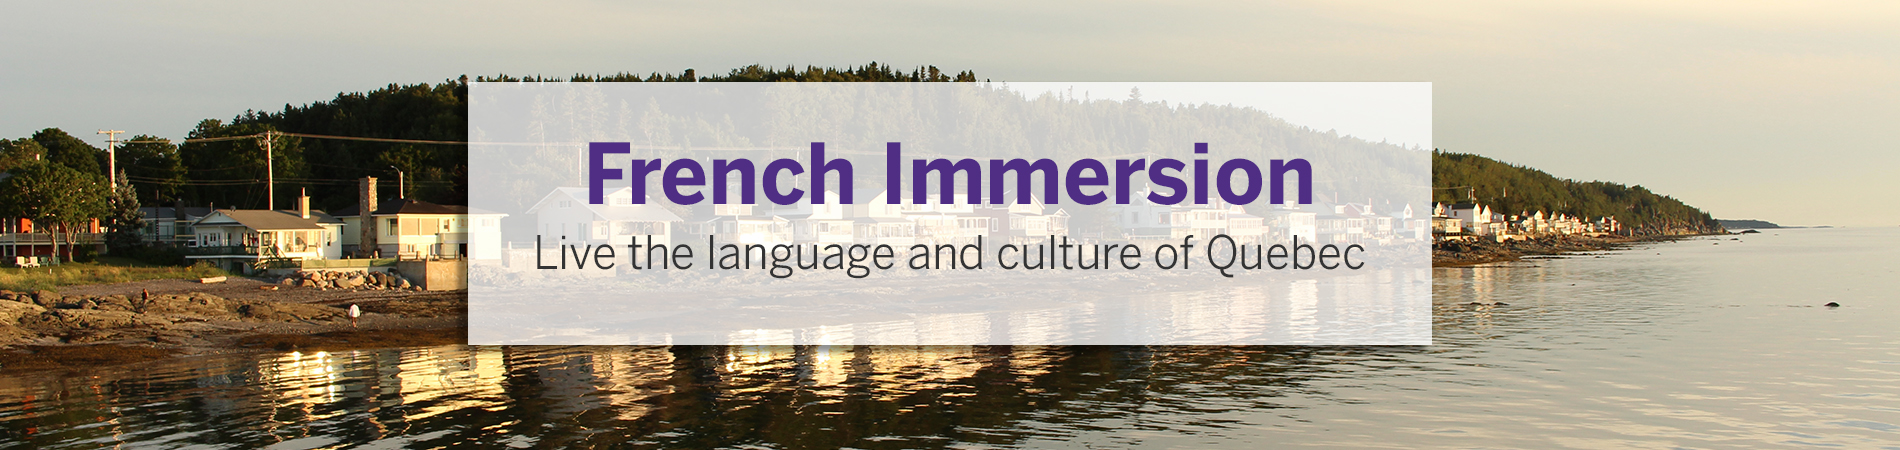 Western French Immersion Live the language and culture of Quebec